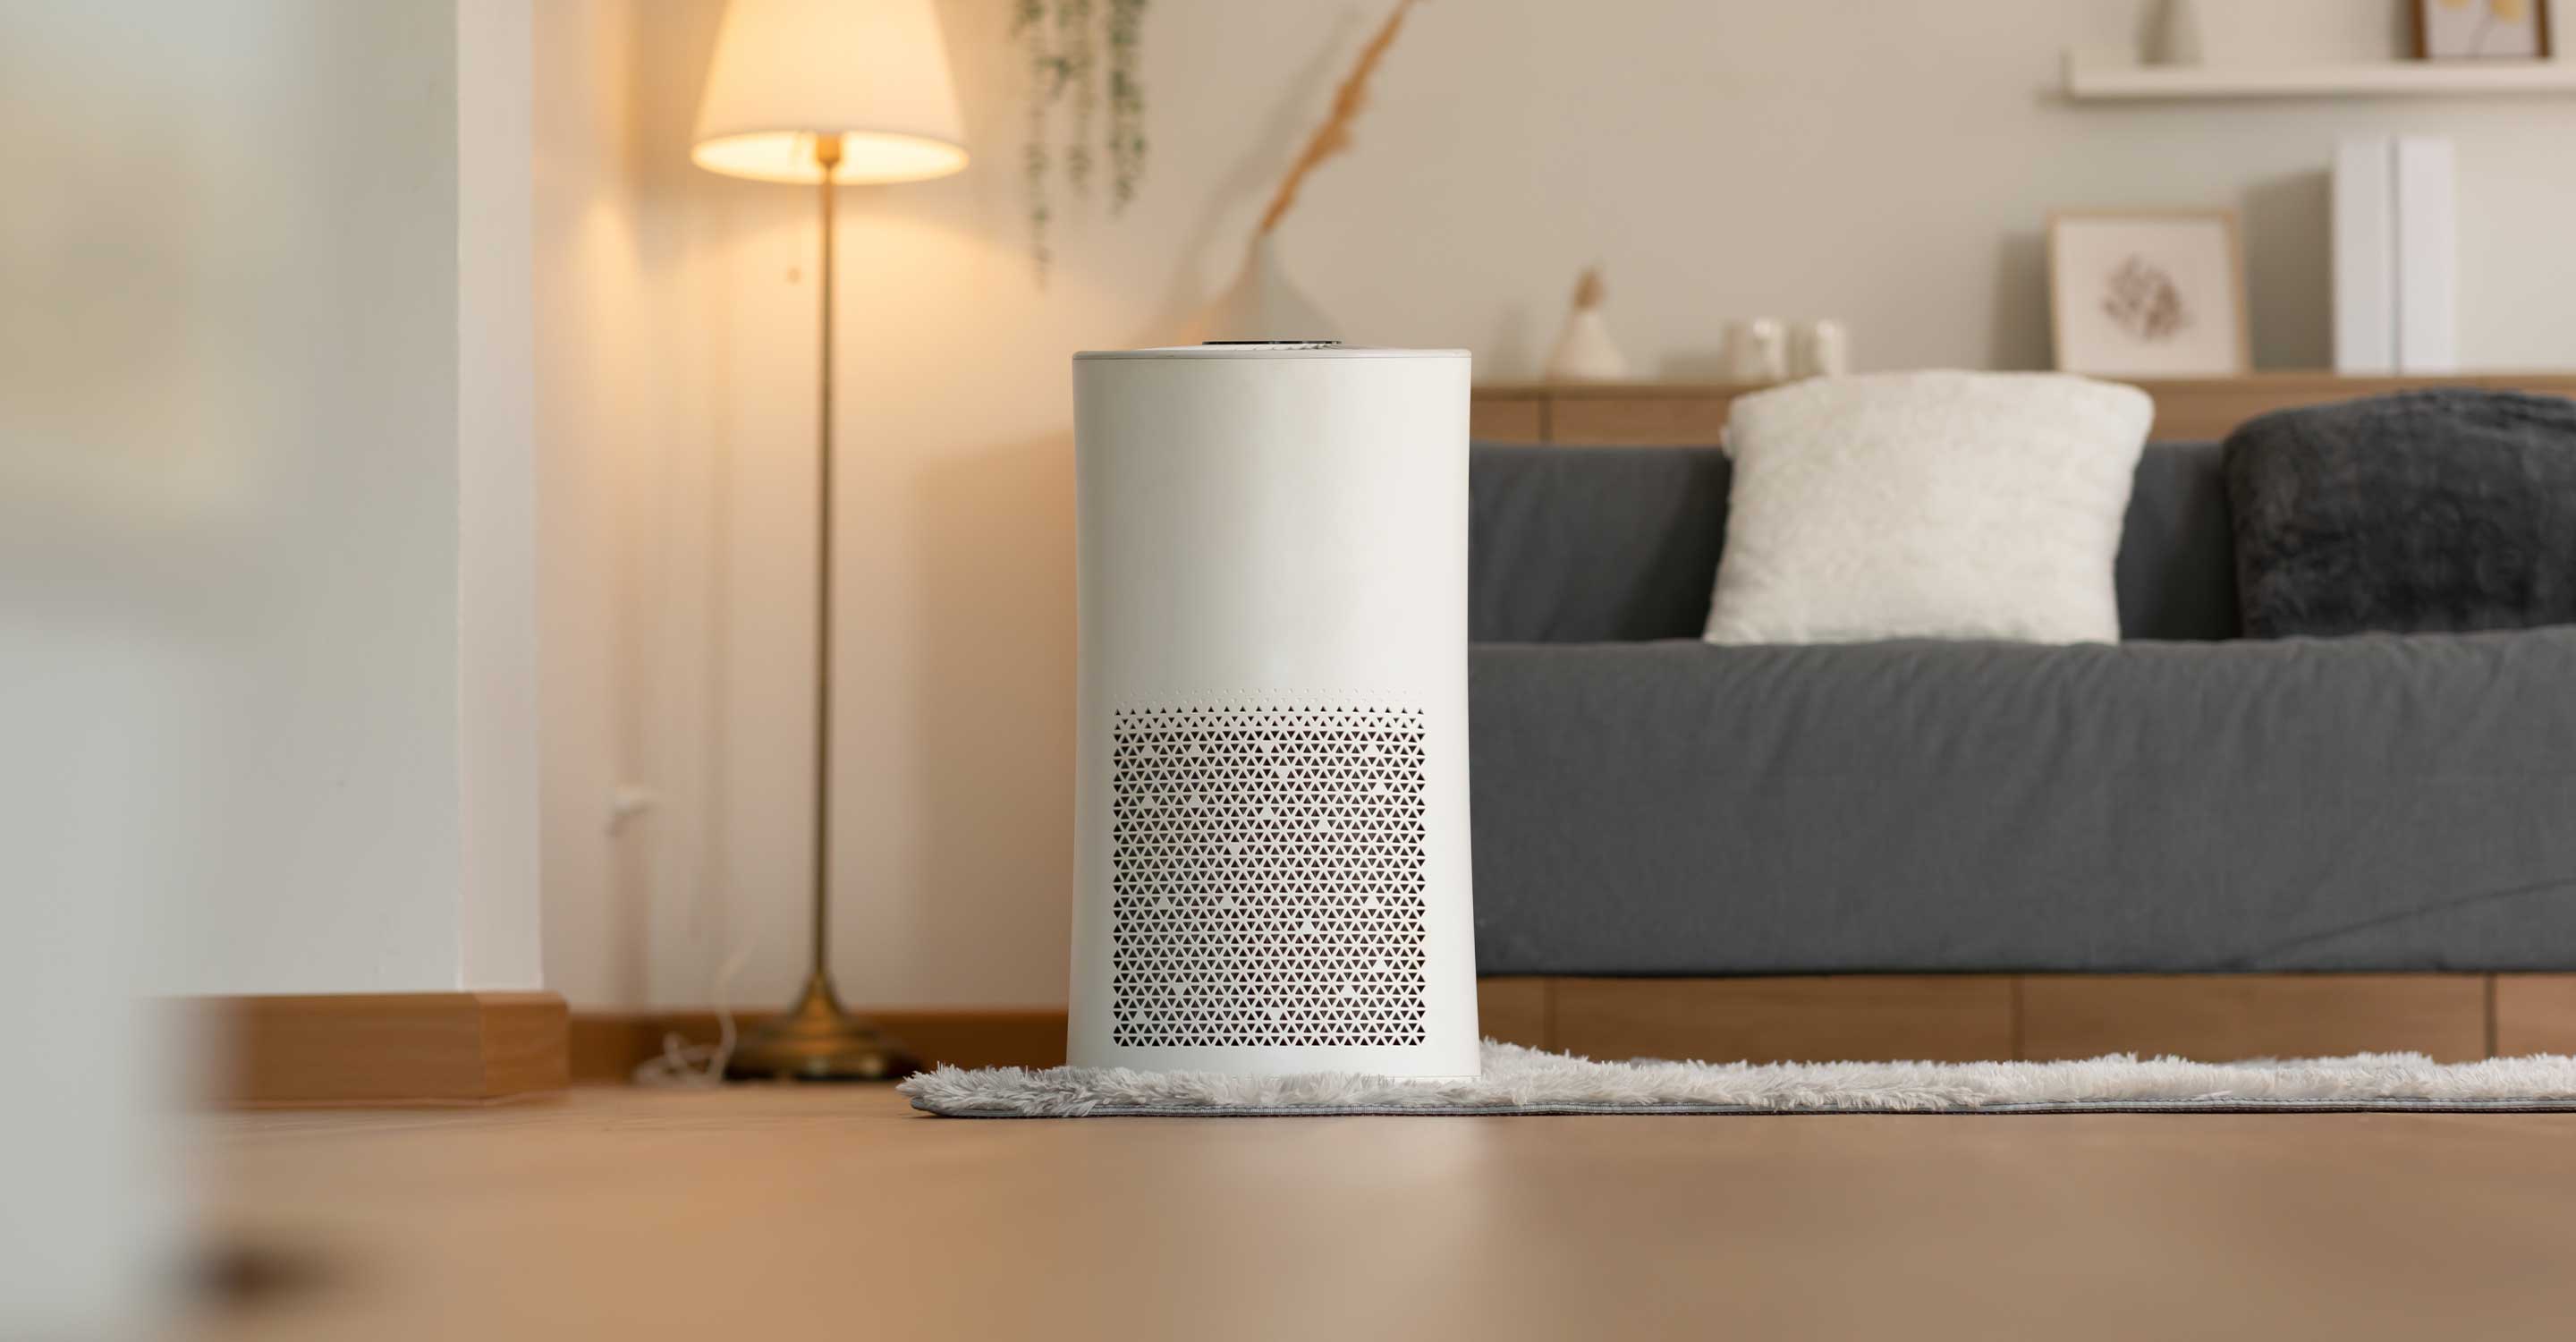 Ionizer Air Purifiers: What Is It and How Does It Work? - Molekule